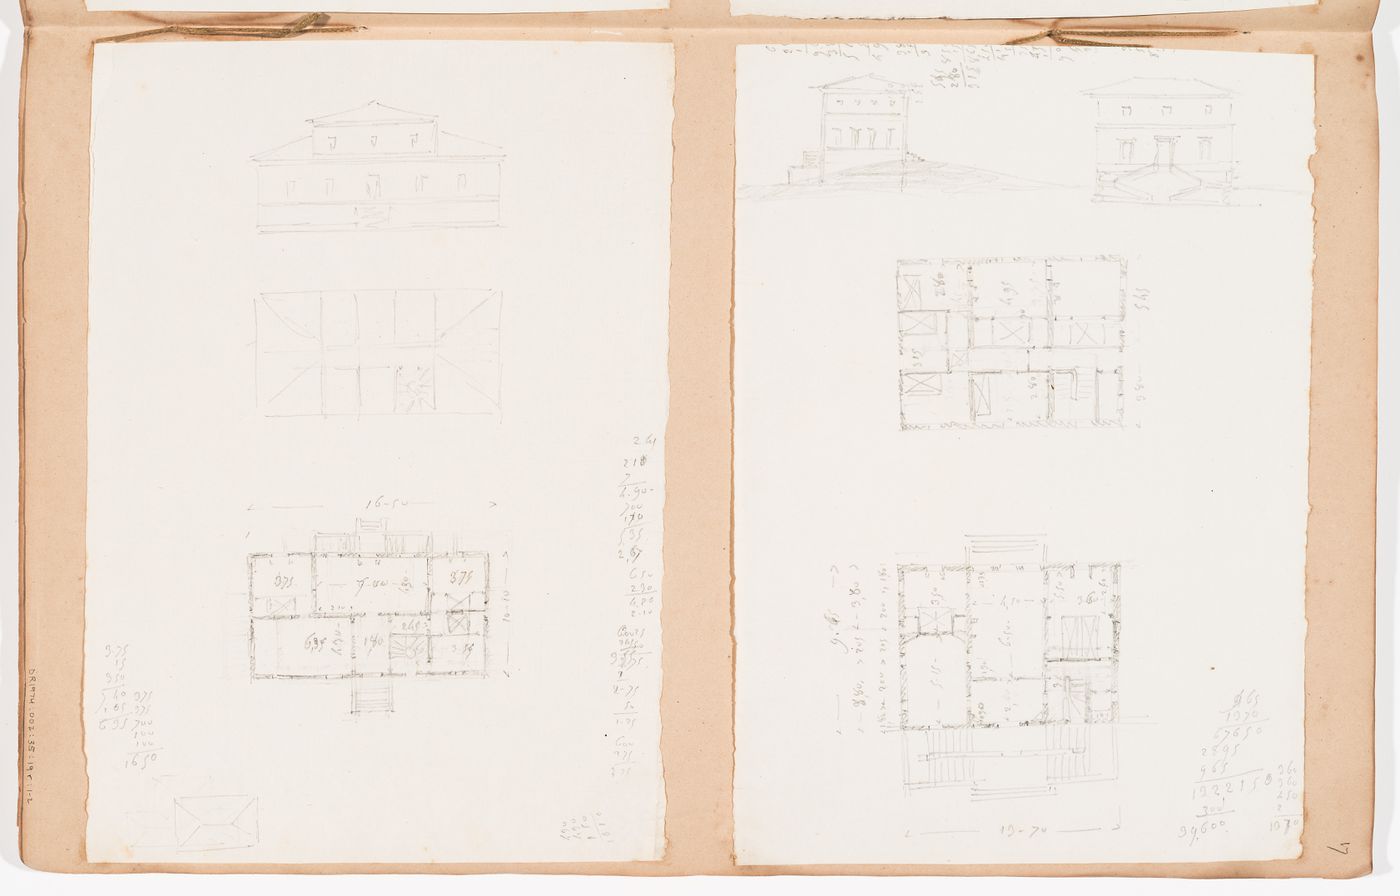 Sketch plans and elevations for country houses; verso: Sketch elevation and plans and for country houses